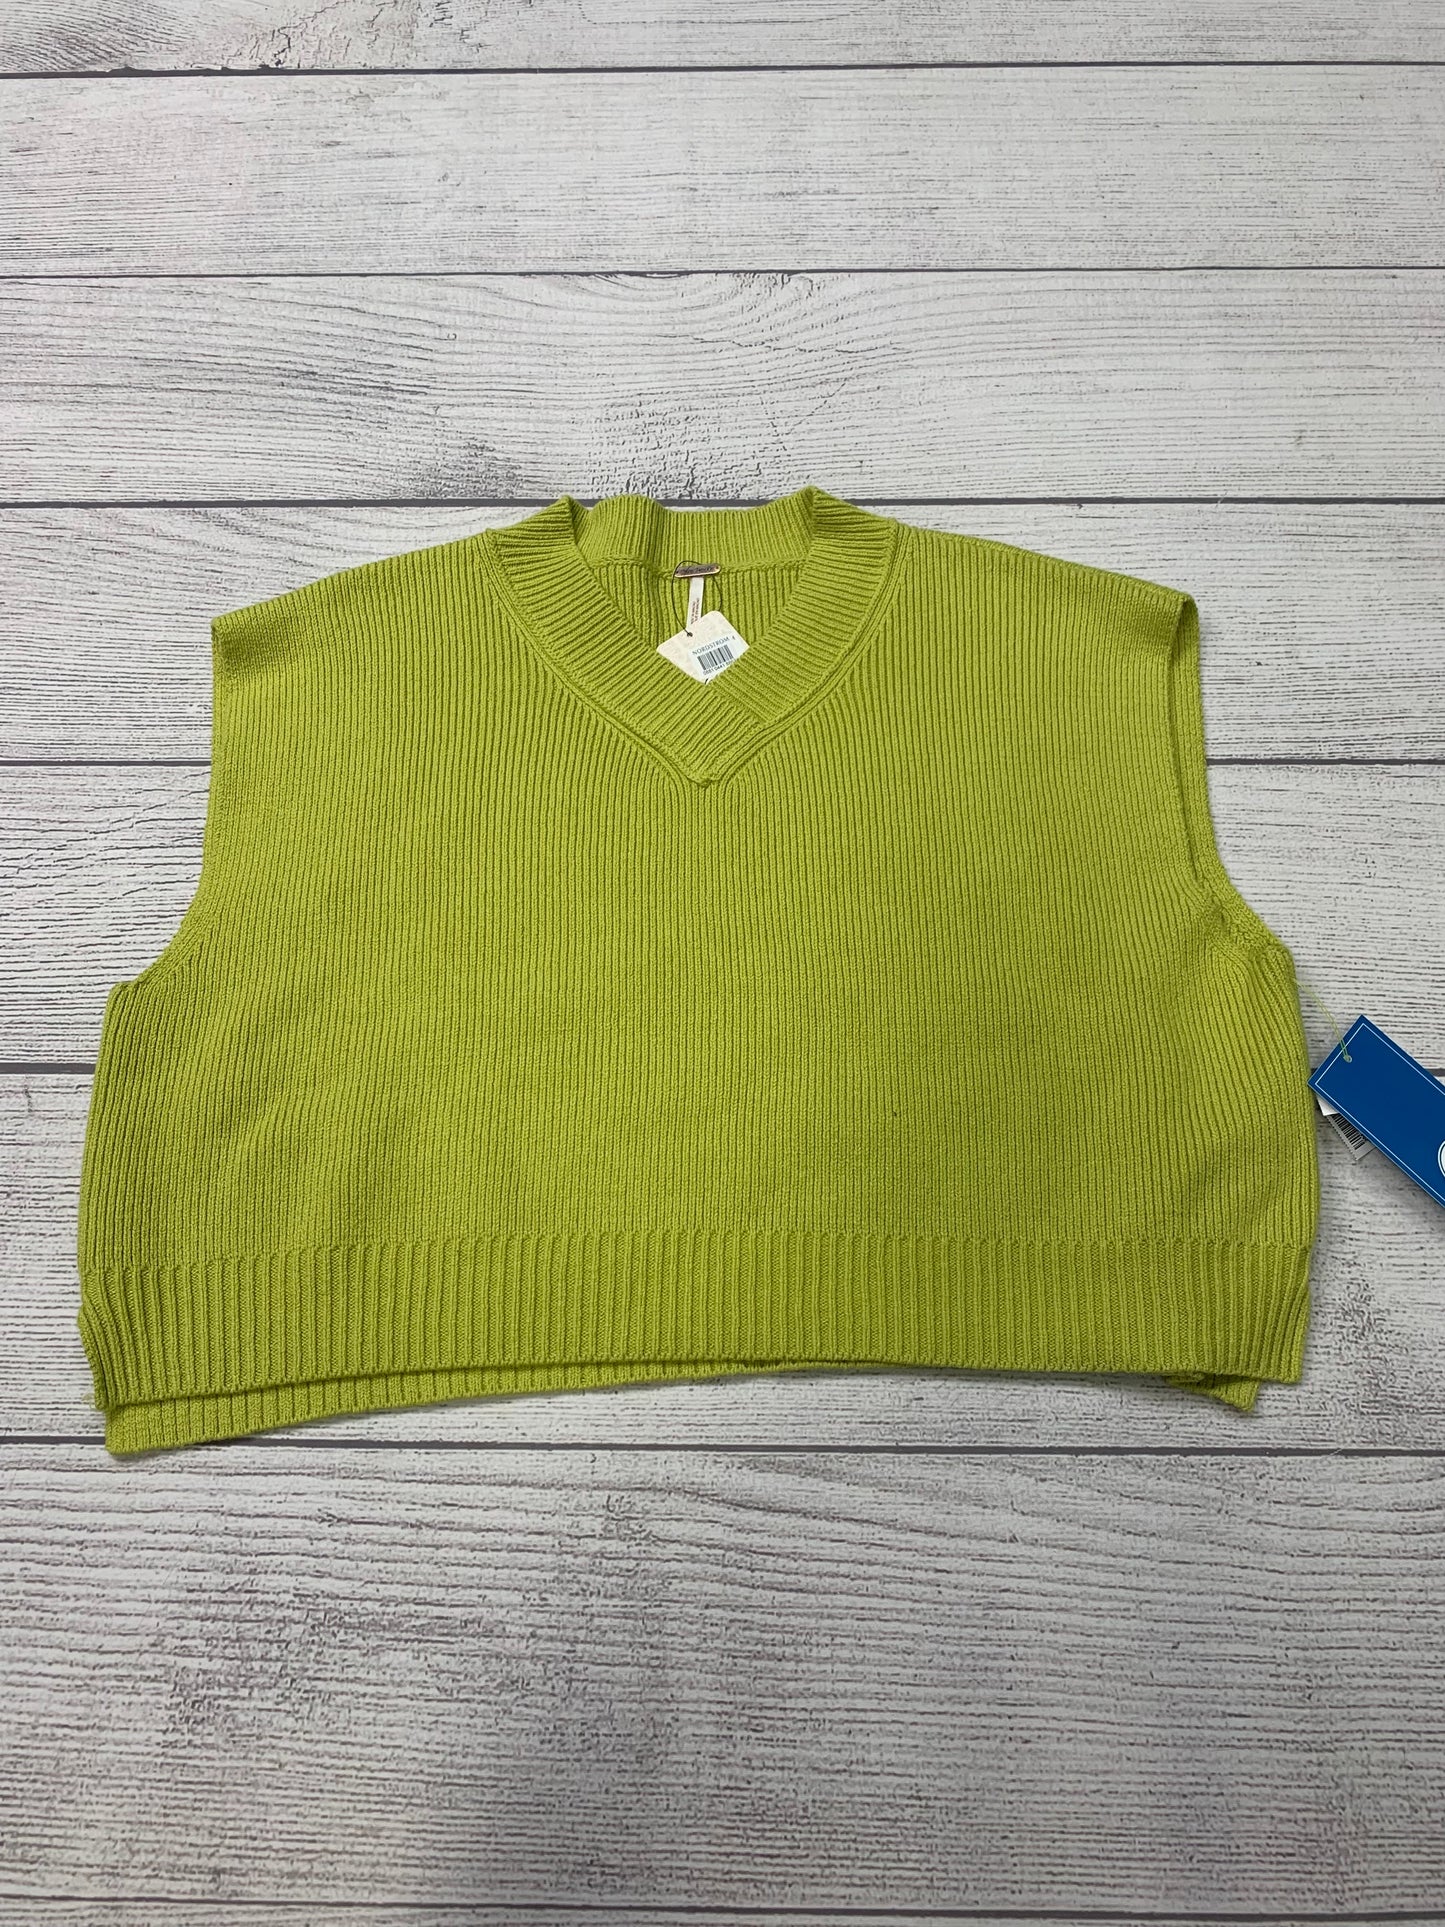 Green Sweater Short Sleeve Free People, Size S